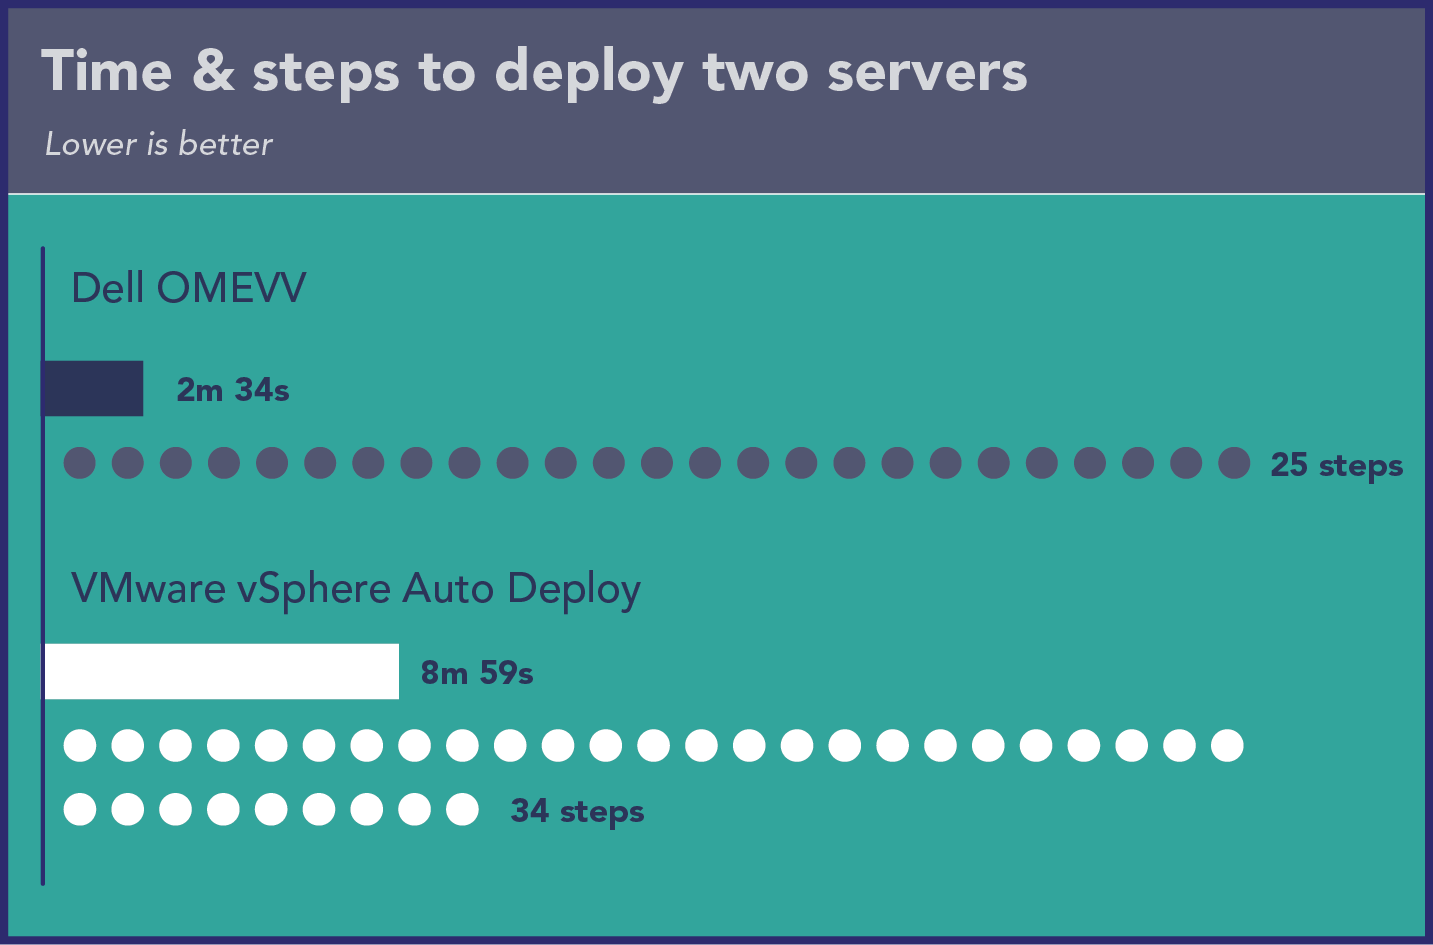 Chart of time and steps to deploy two servers. Dell OMEVV shows 2 minutes 34 seconds and 25 steps. VMware vSphere Auto Deploy shows 8 minutes 59 seconds and 34 steps.